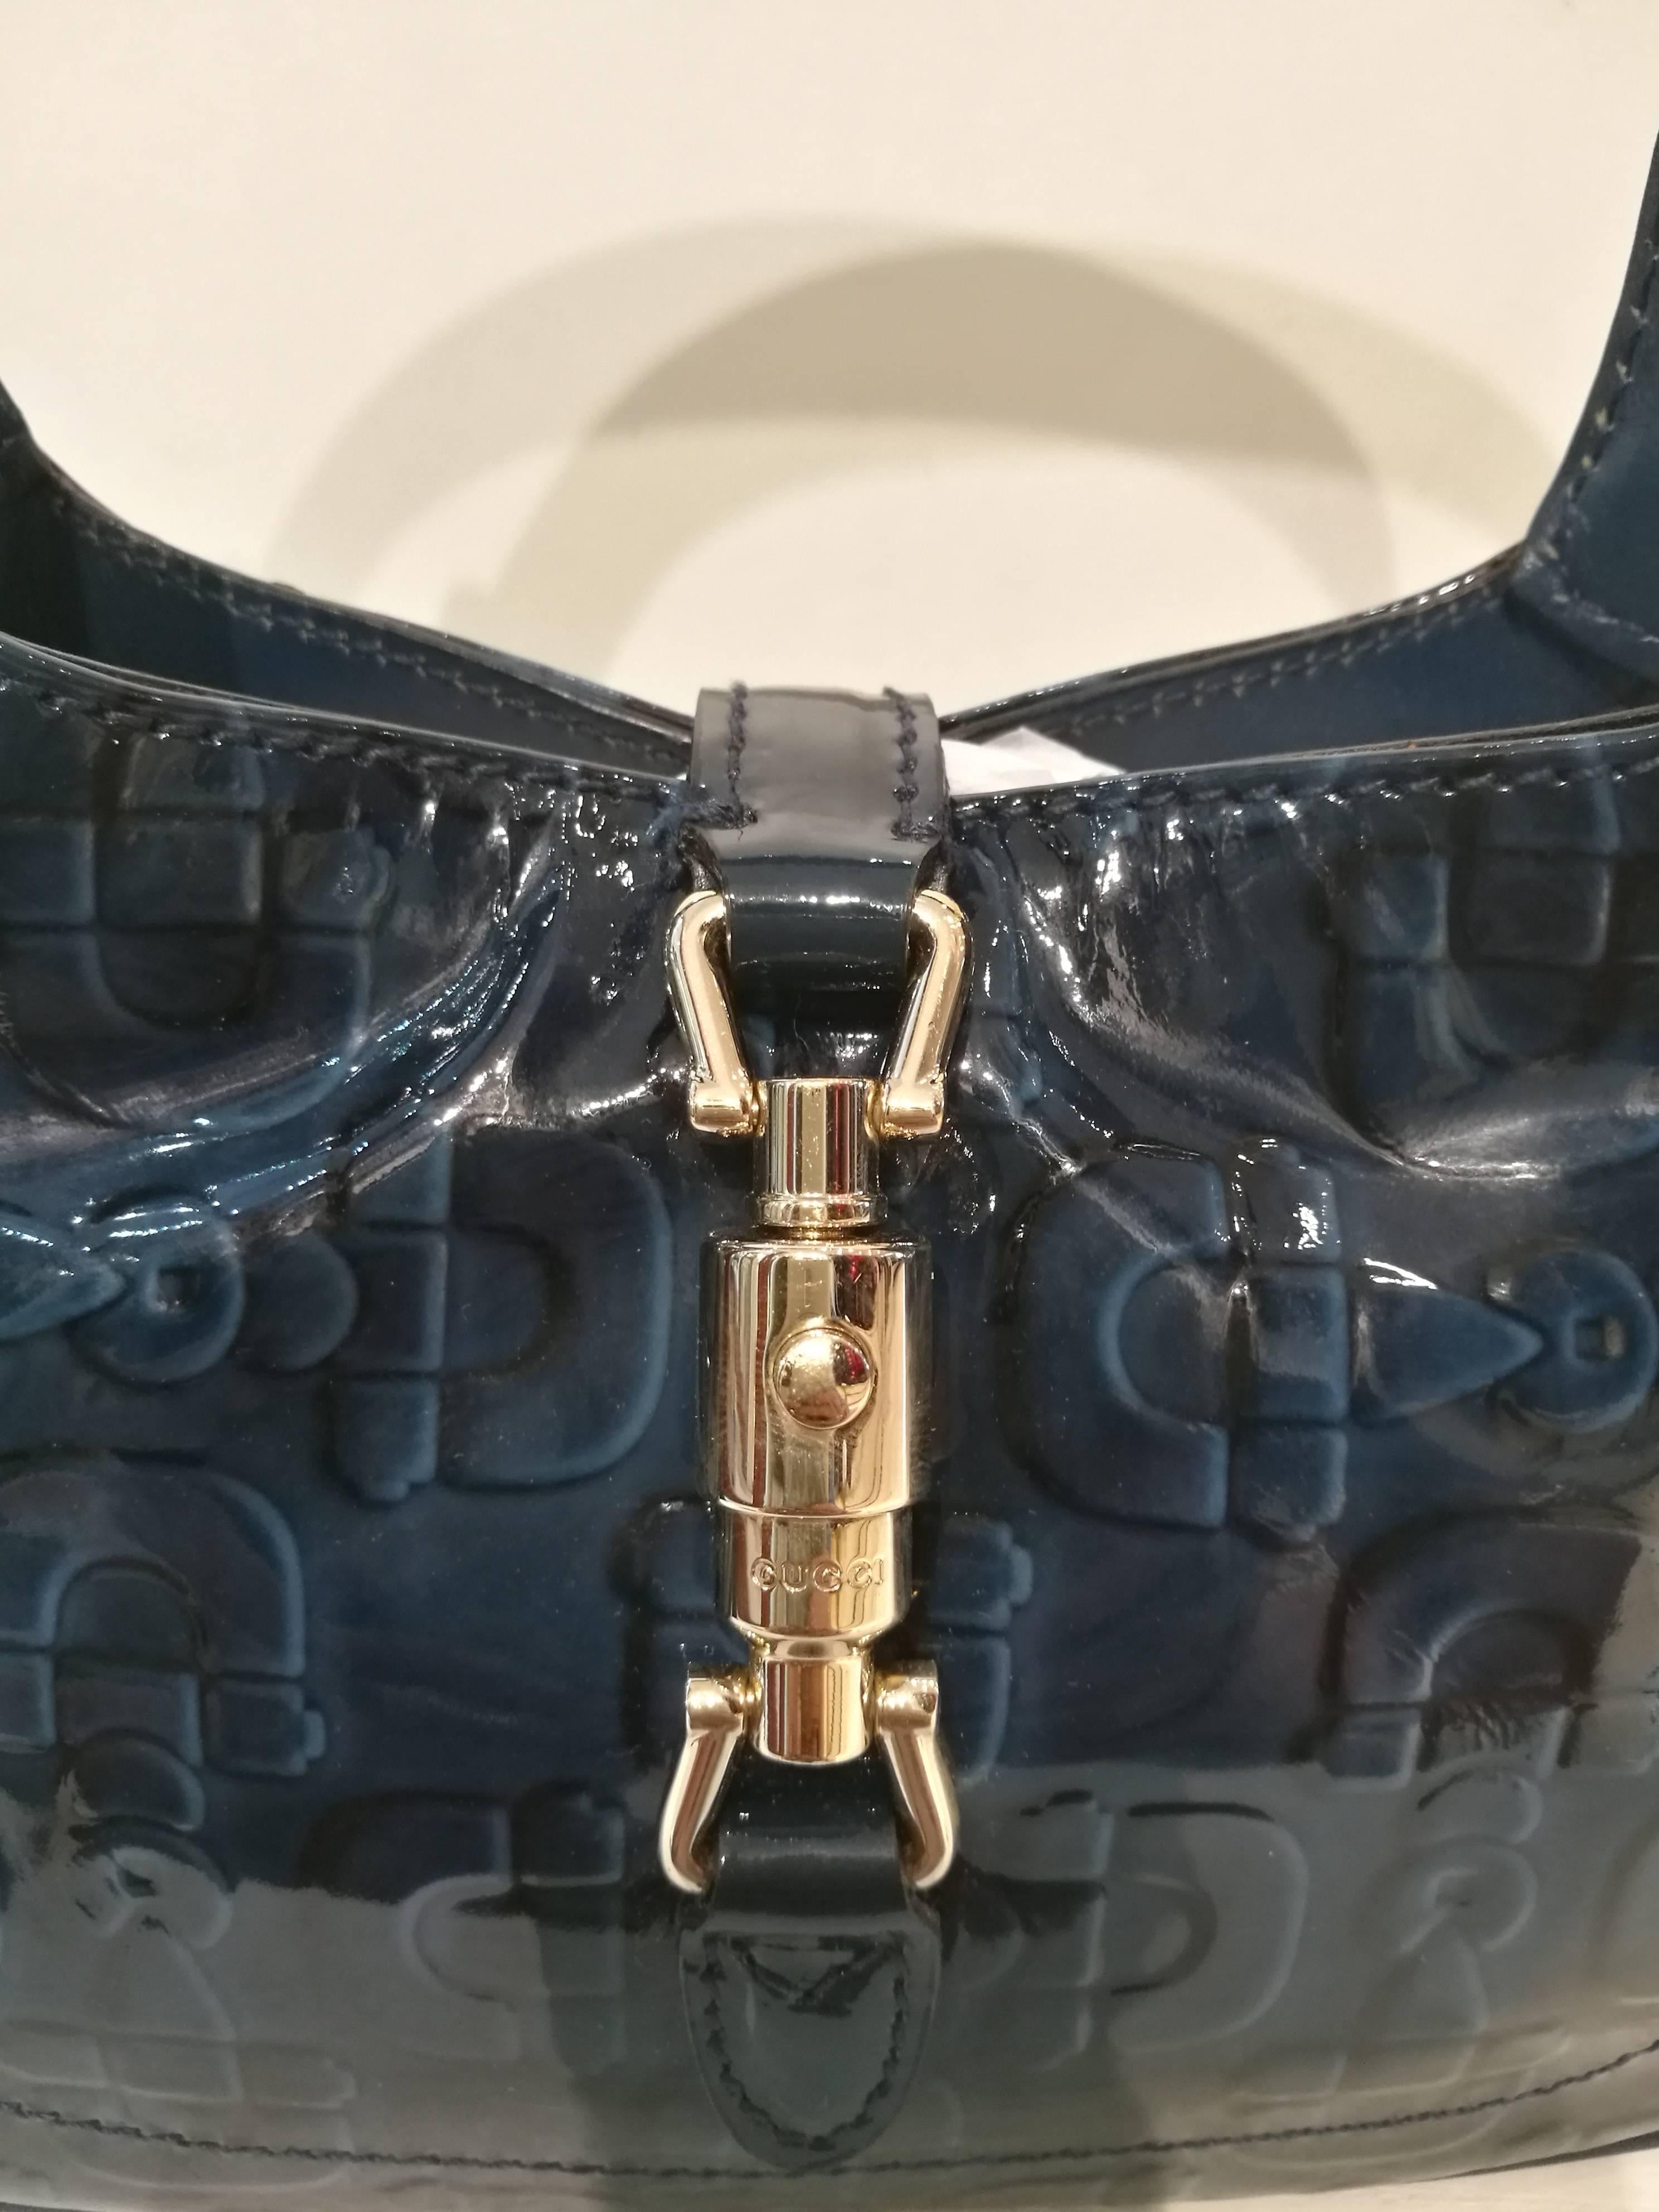 Gucci mini blu horsebit Jackie bag

Totally made in italy in dark blu patent leather 

Gold tone hardware

Unworn

Price of retail: 520,00 €

Size: width 7.5 x 11.3 height x gusset 2.8 cm
Handles approx. 24 cm